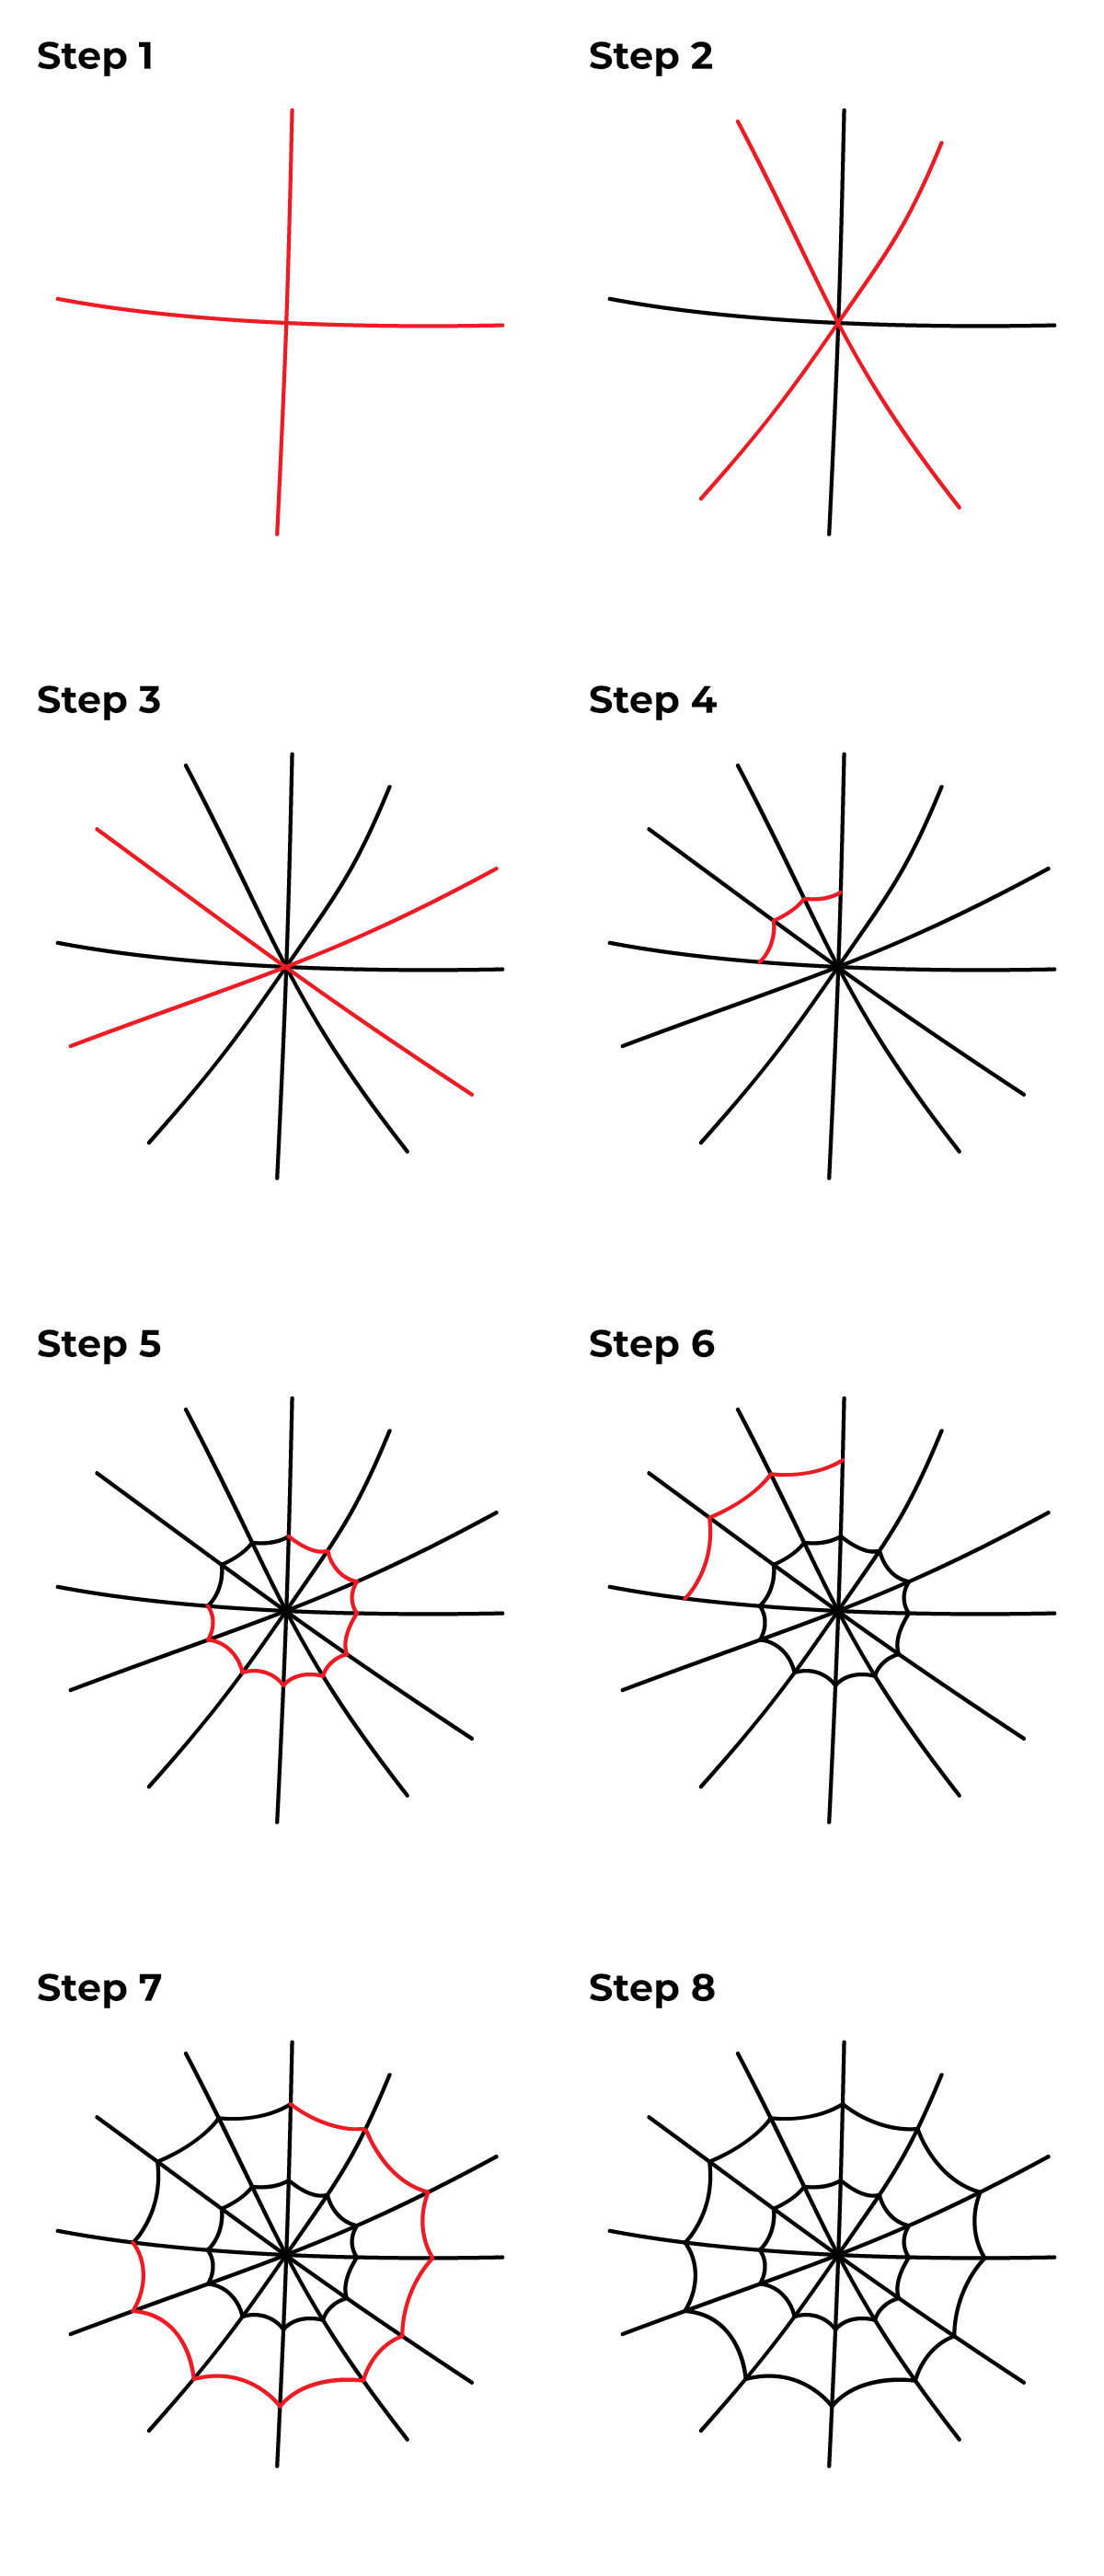 Easy How to Draw a Spider Web Tutorial Video